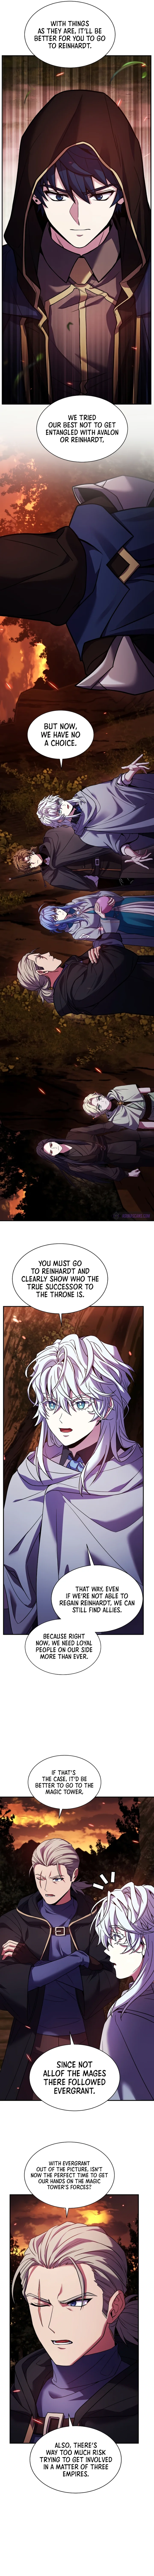 Return of the Legendary Spear Knight - Chapter 126 Page 7